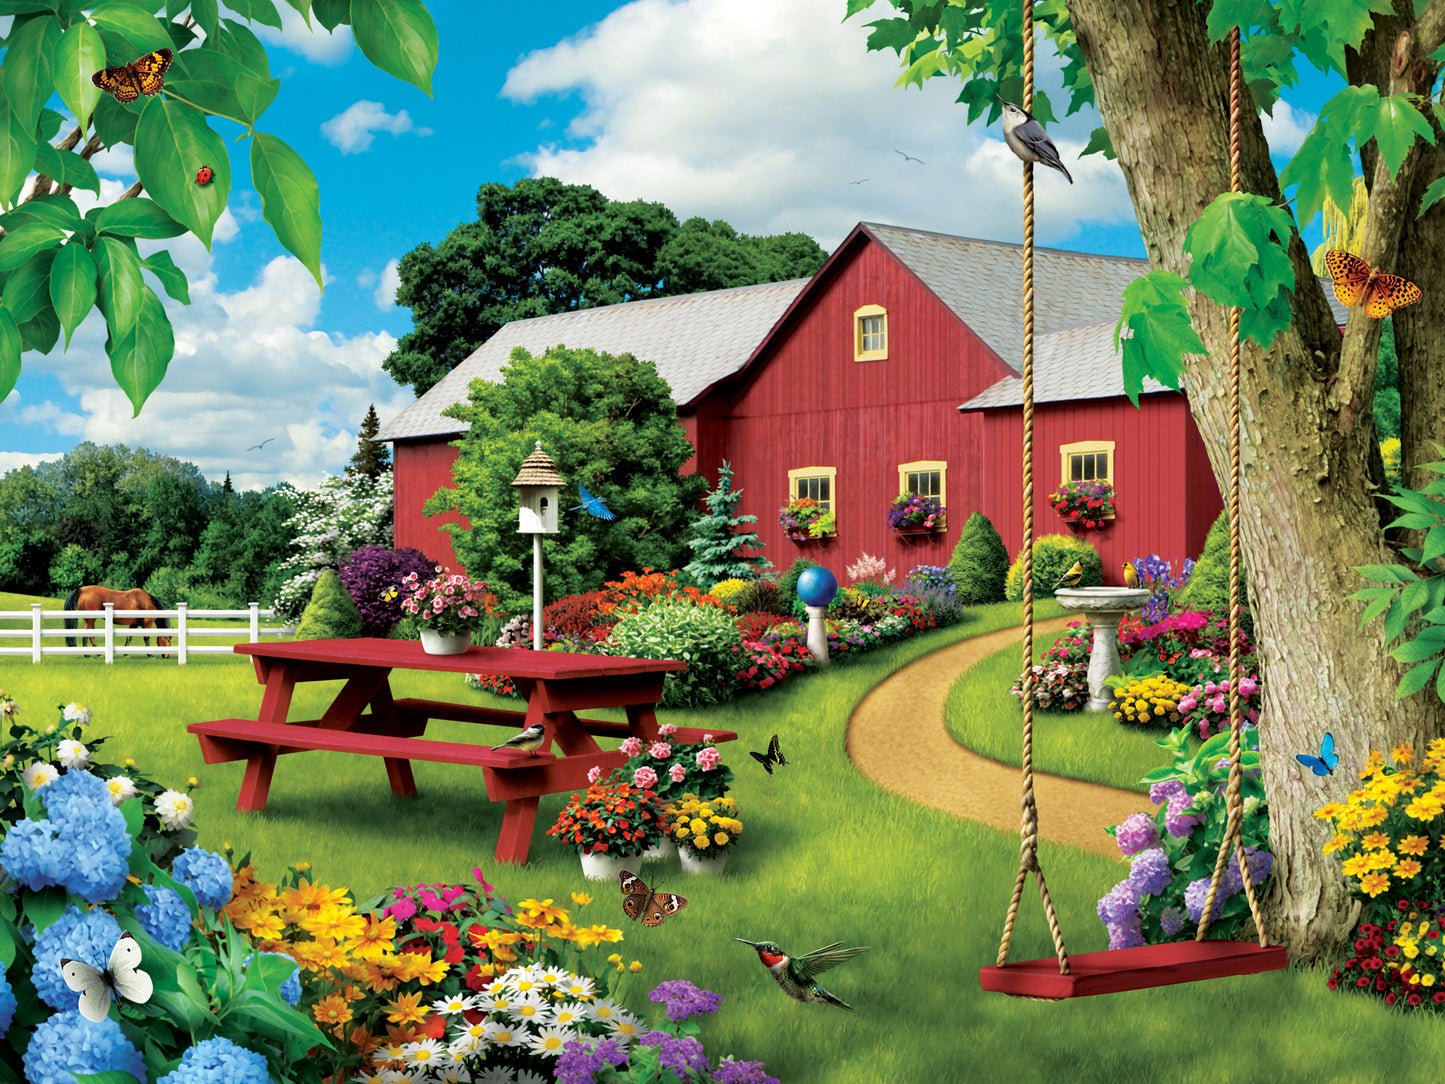 Lazy Days Picnic Paradise 750 Piece Jigsaw Puzzle by Masterpieces